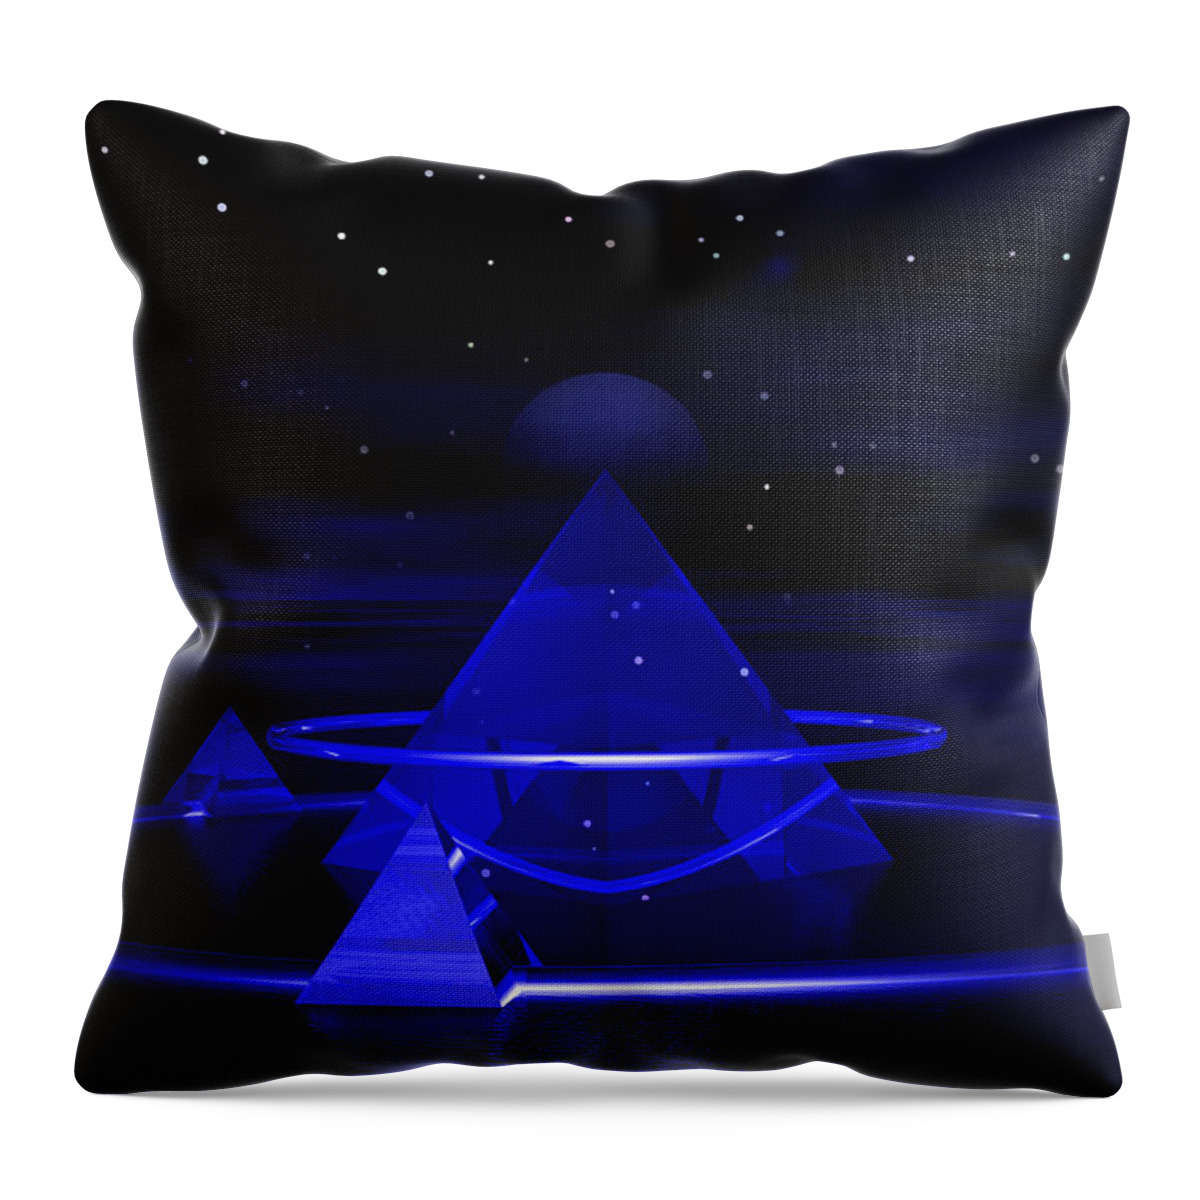 Artistic Throw Pillow featuring the digital art Artistic #9 by Maye Loeser